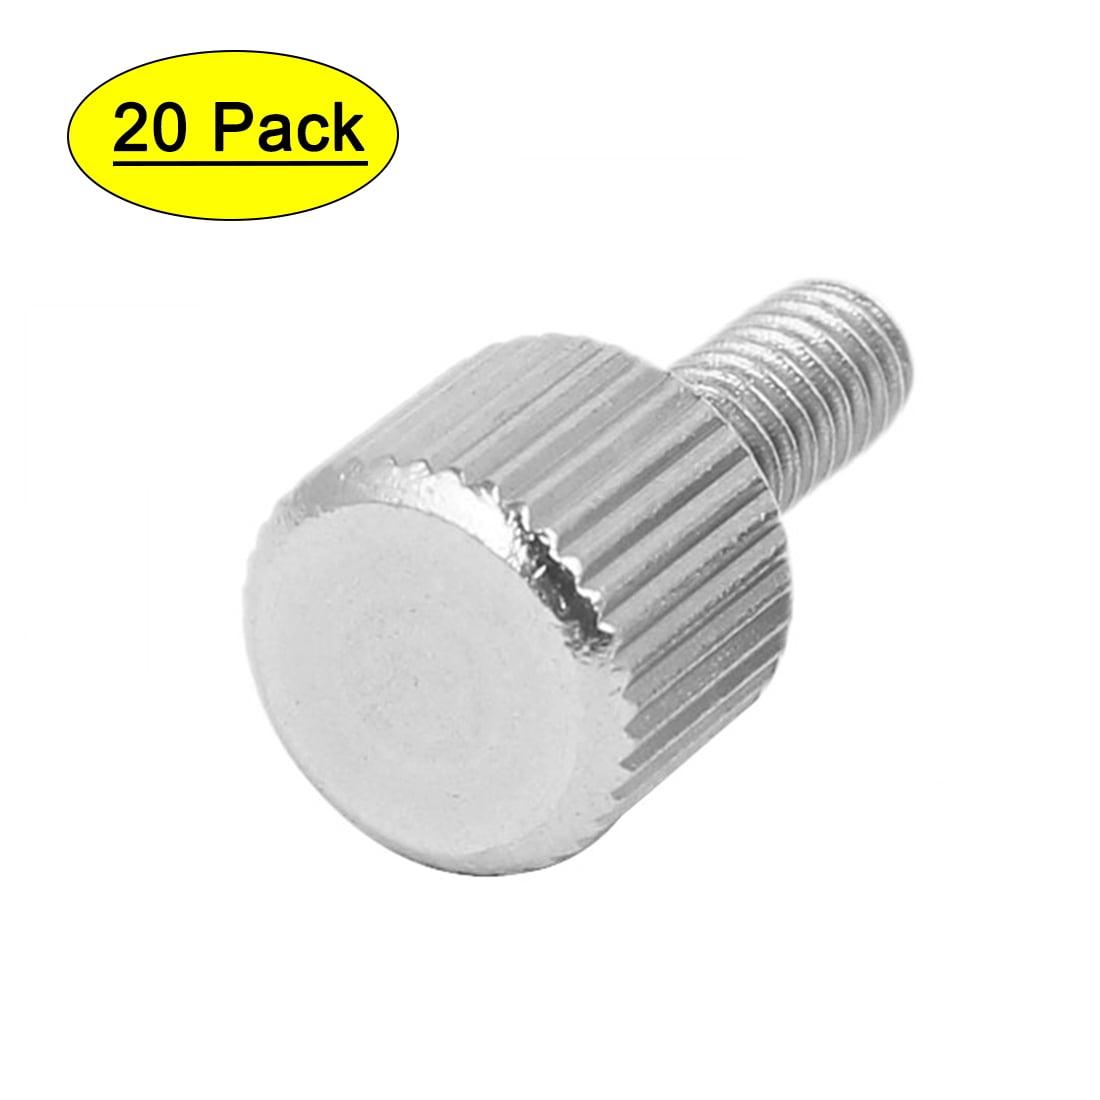 20Pcs M2.5 x 8mm Toolless Thumb Screw Stainless Steel TETS 